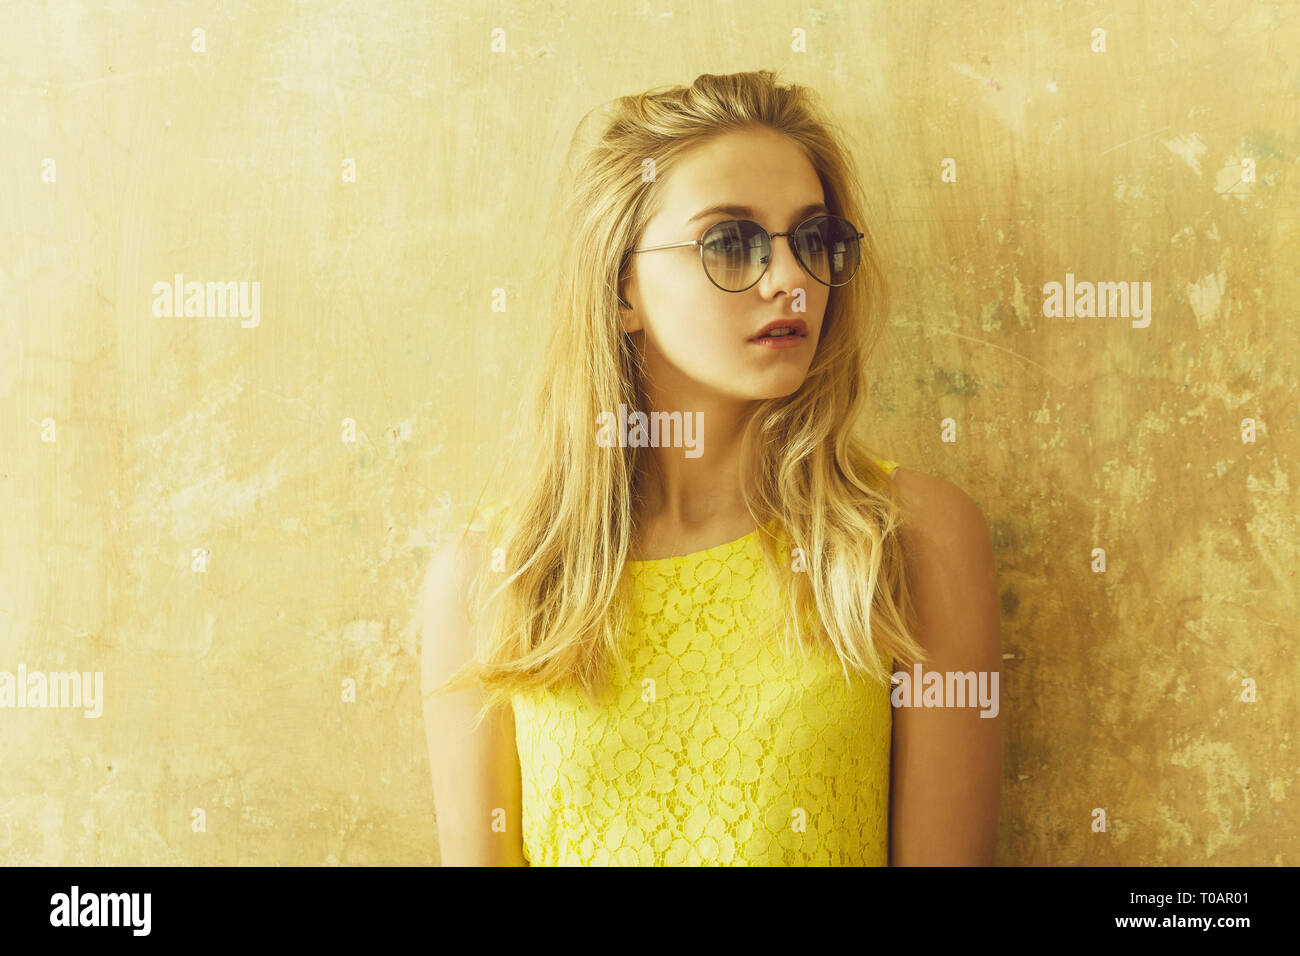 Pretty Girl With Long Blonde Hair In Yellow Dress Sunglasses